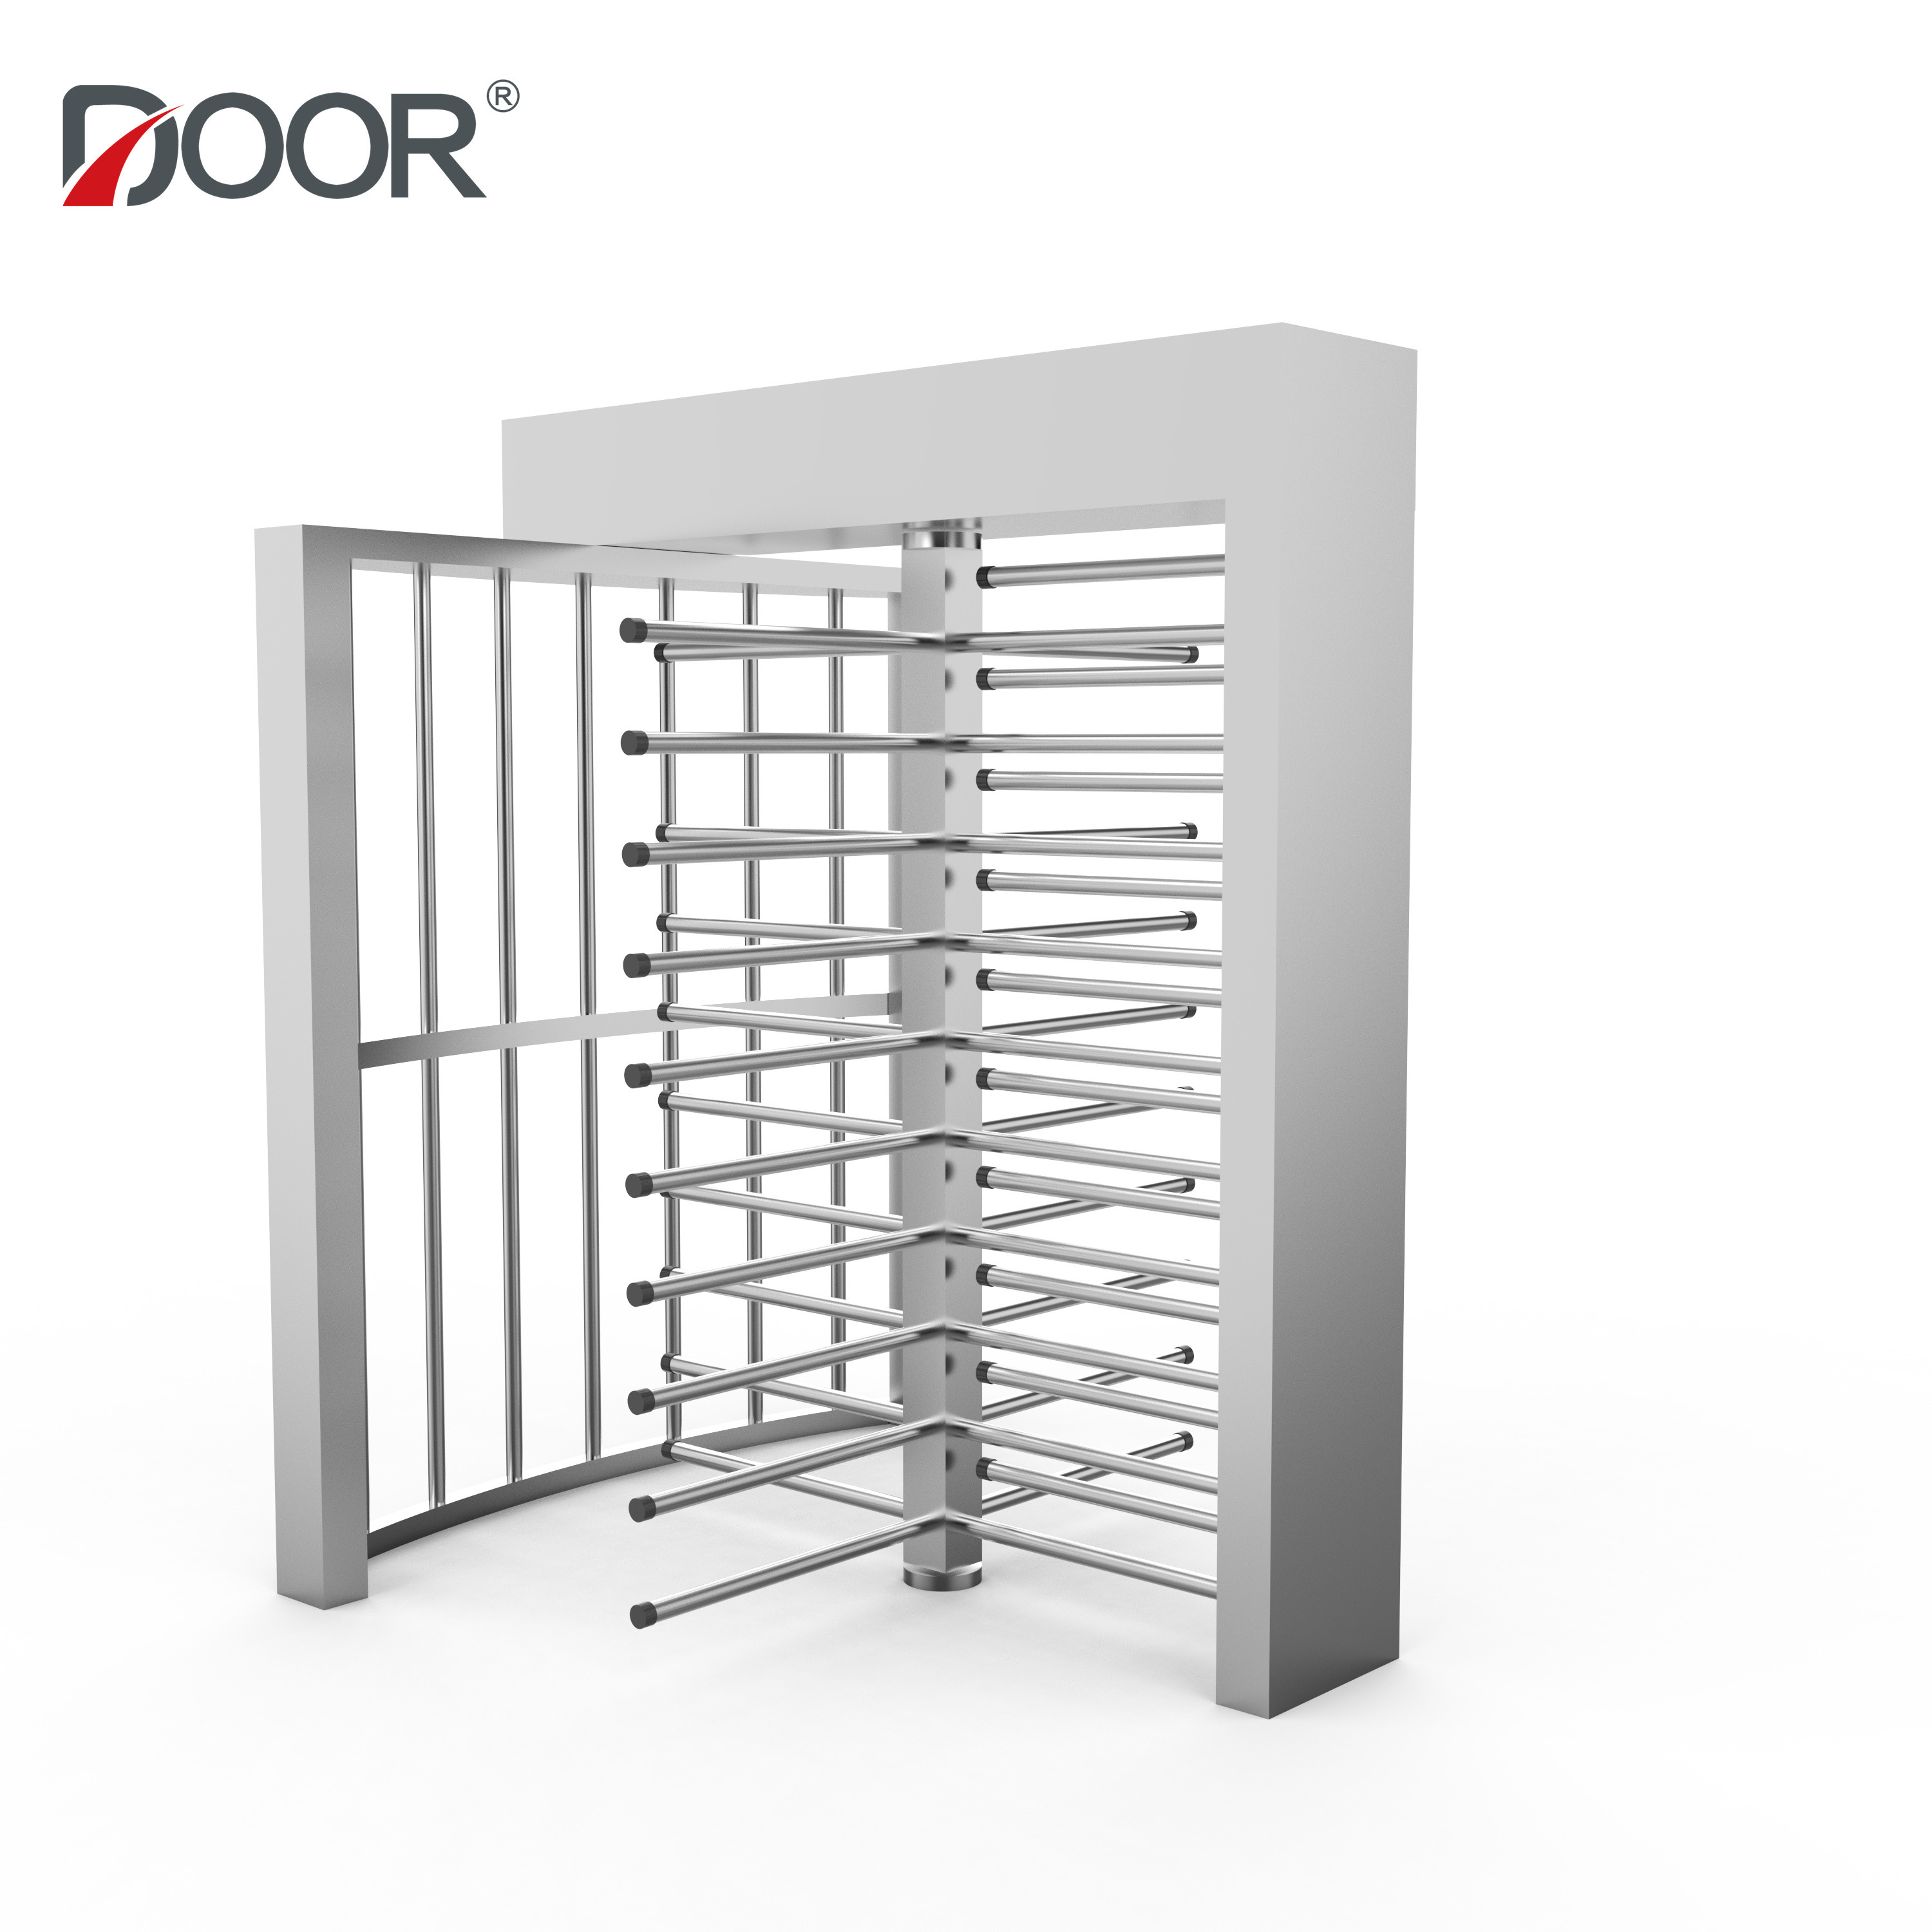 Rotating Electronic Access Control Turnstile Full Height Gates Systems